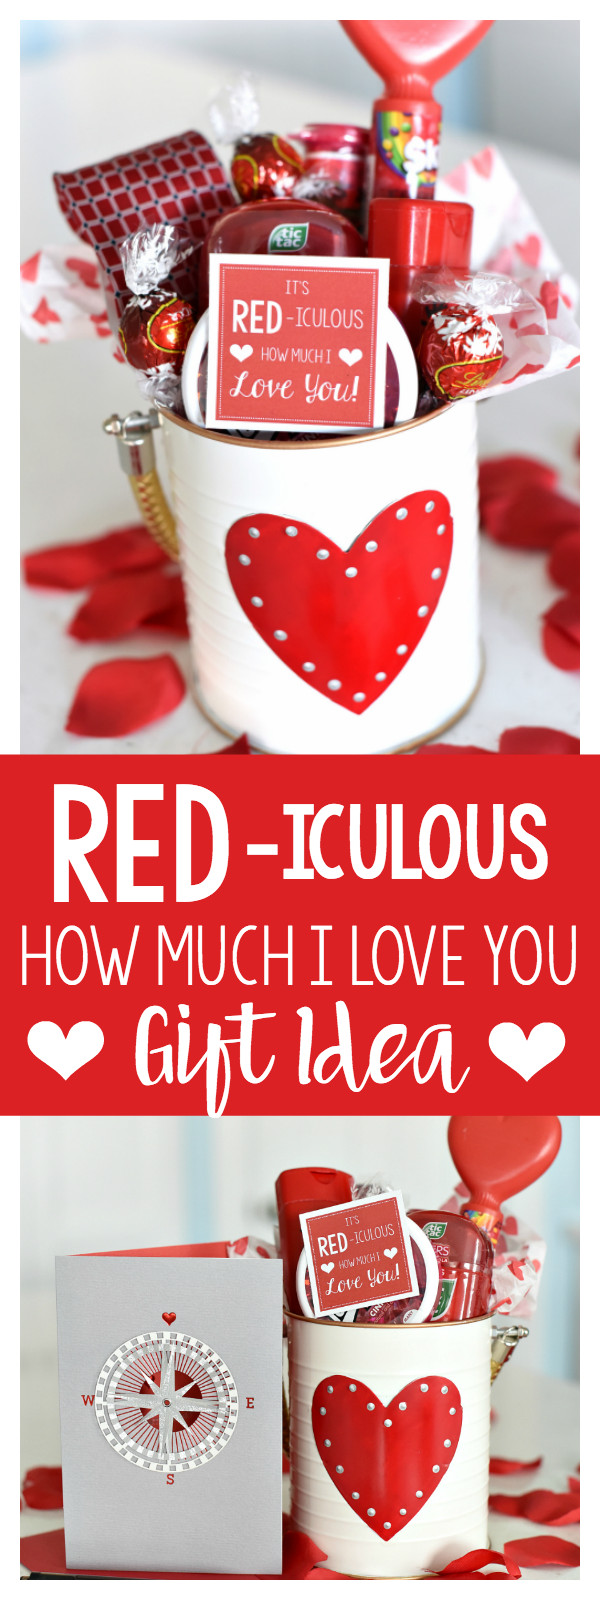 Great Valentine'S Day Gift Ideas
 Cute Valentine s Day Gift Idea RED iculous Basket